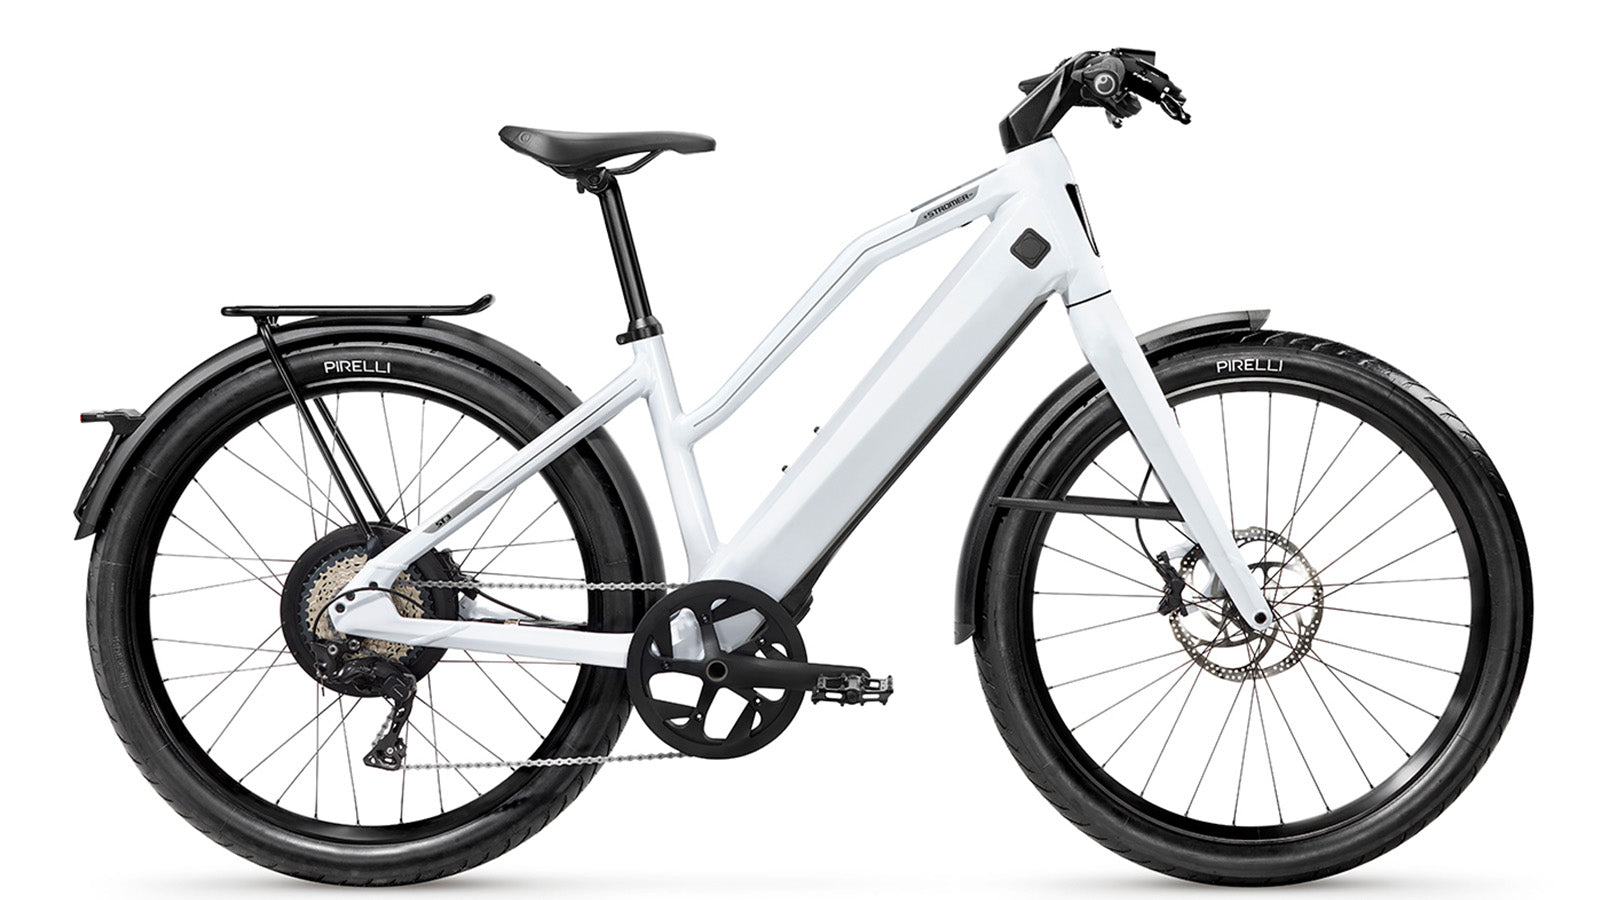 Stromer - ST3 Sport electric bicycle with a pinion gearbox and disc brakes, equipped with black tires, a rear rack, and fenders, presented against a white background.